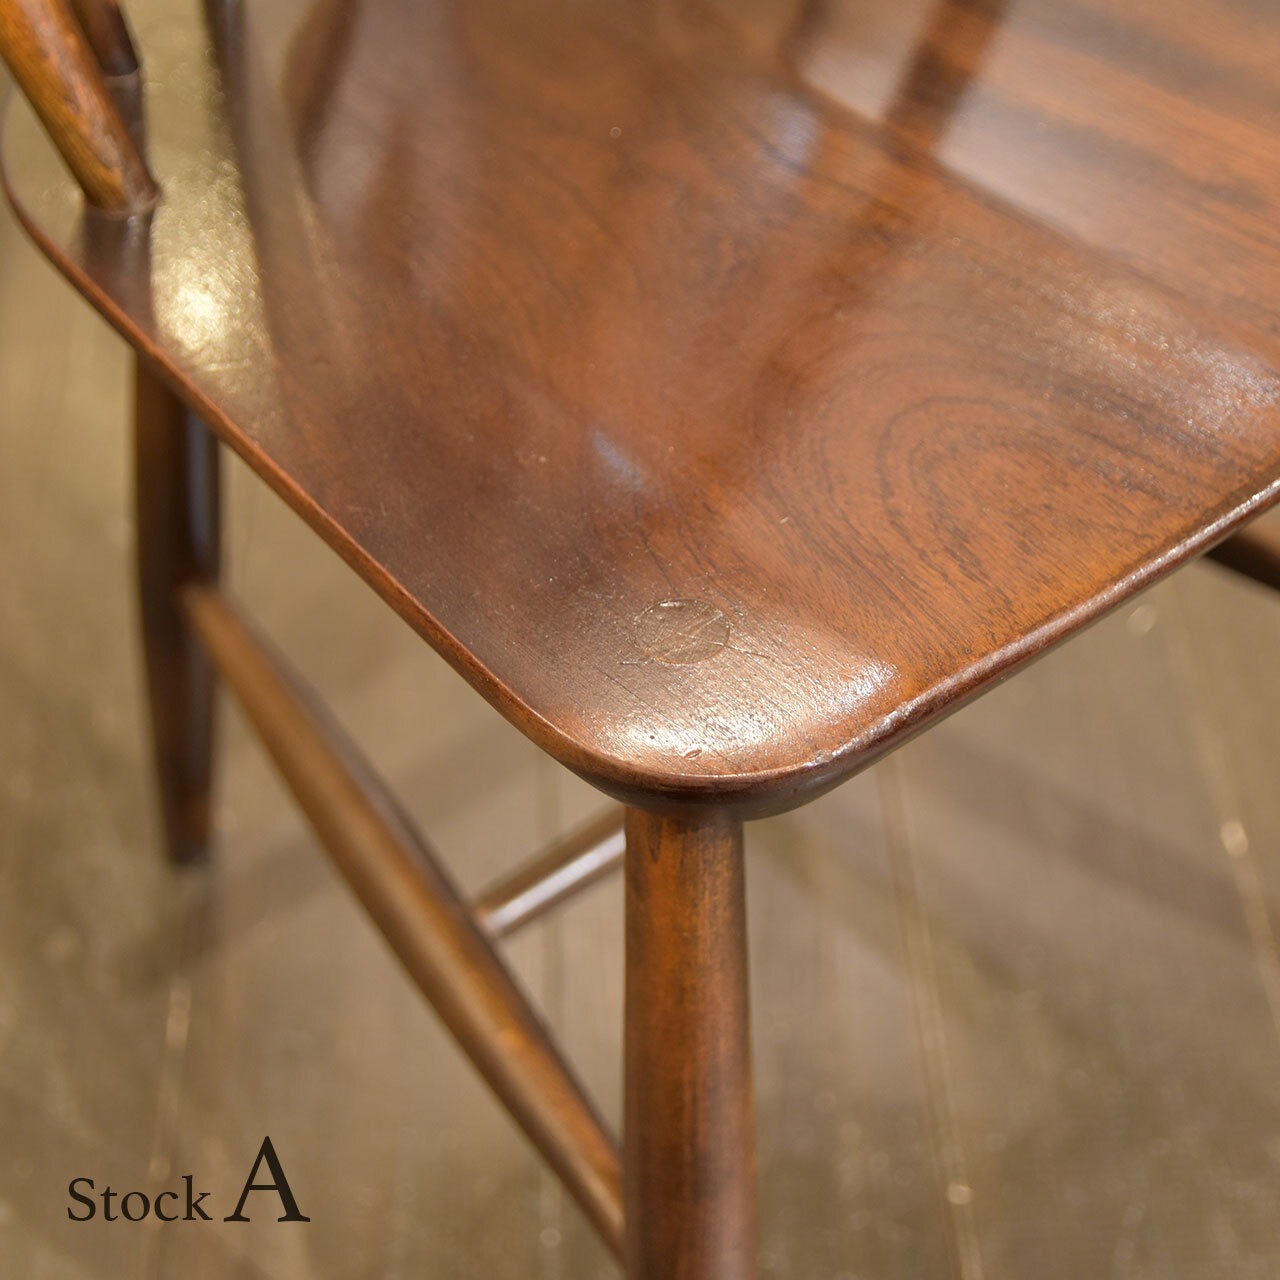 Ercol Thistle back Chair【A】  / アーコール シスルバック チェア / 2010BNS-001A